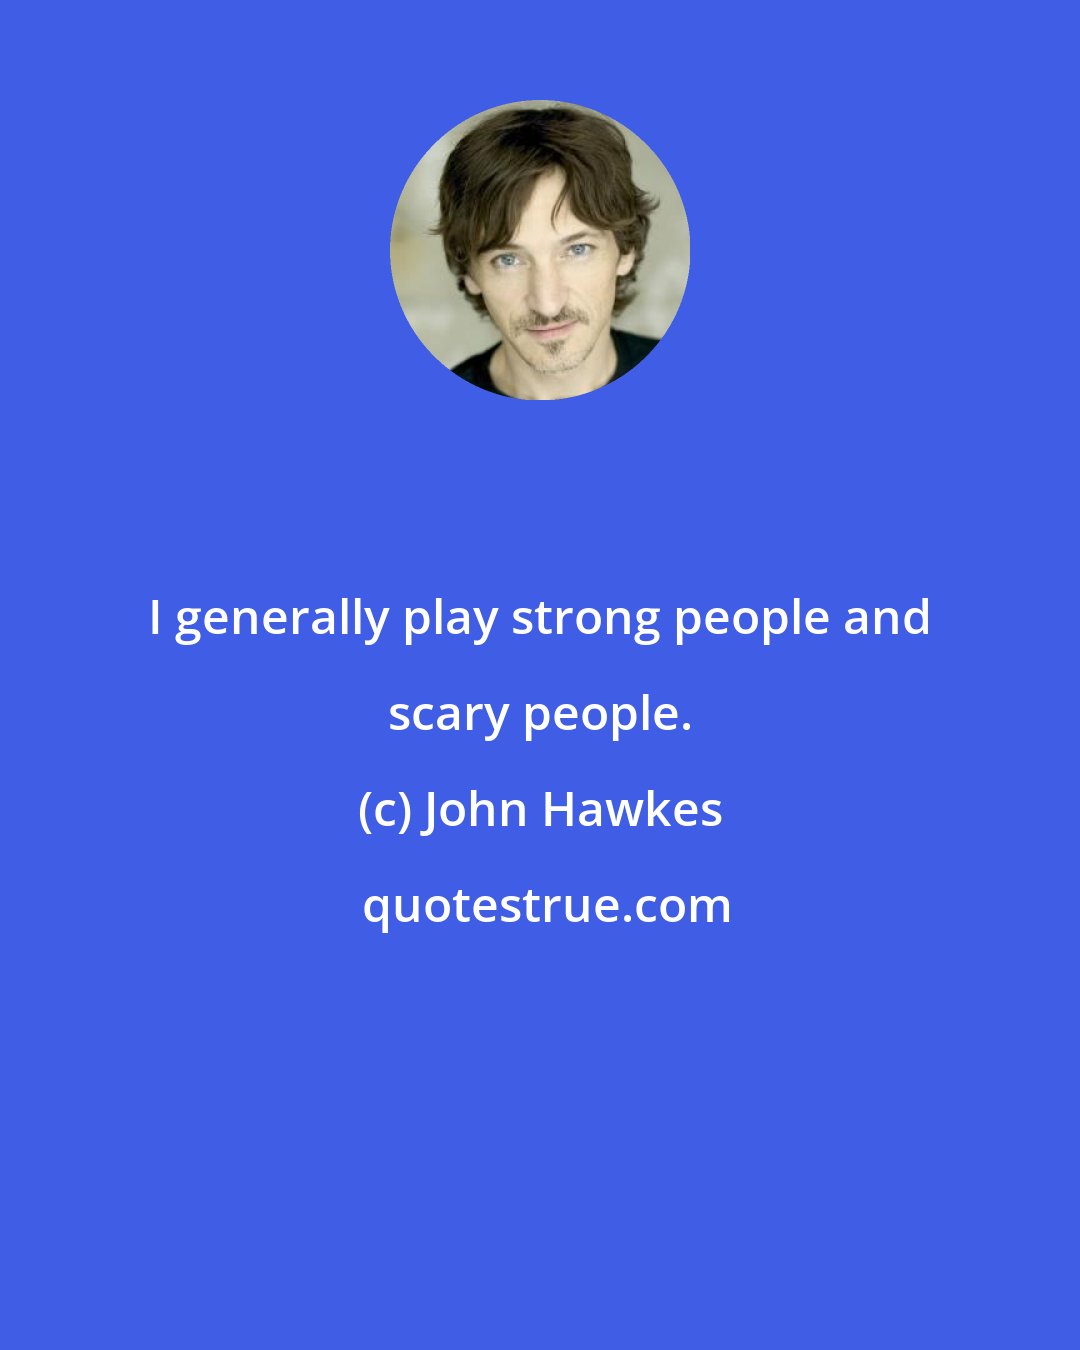 John Hawkes: I generally play strong people and scary people.